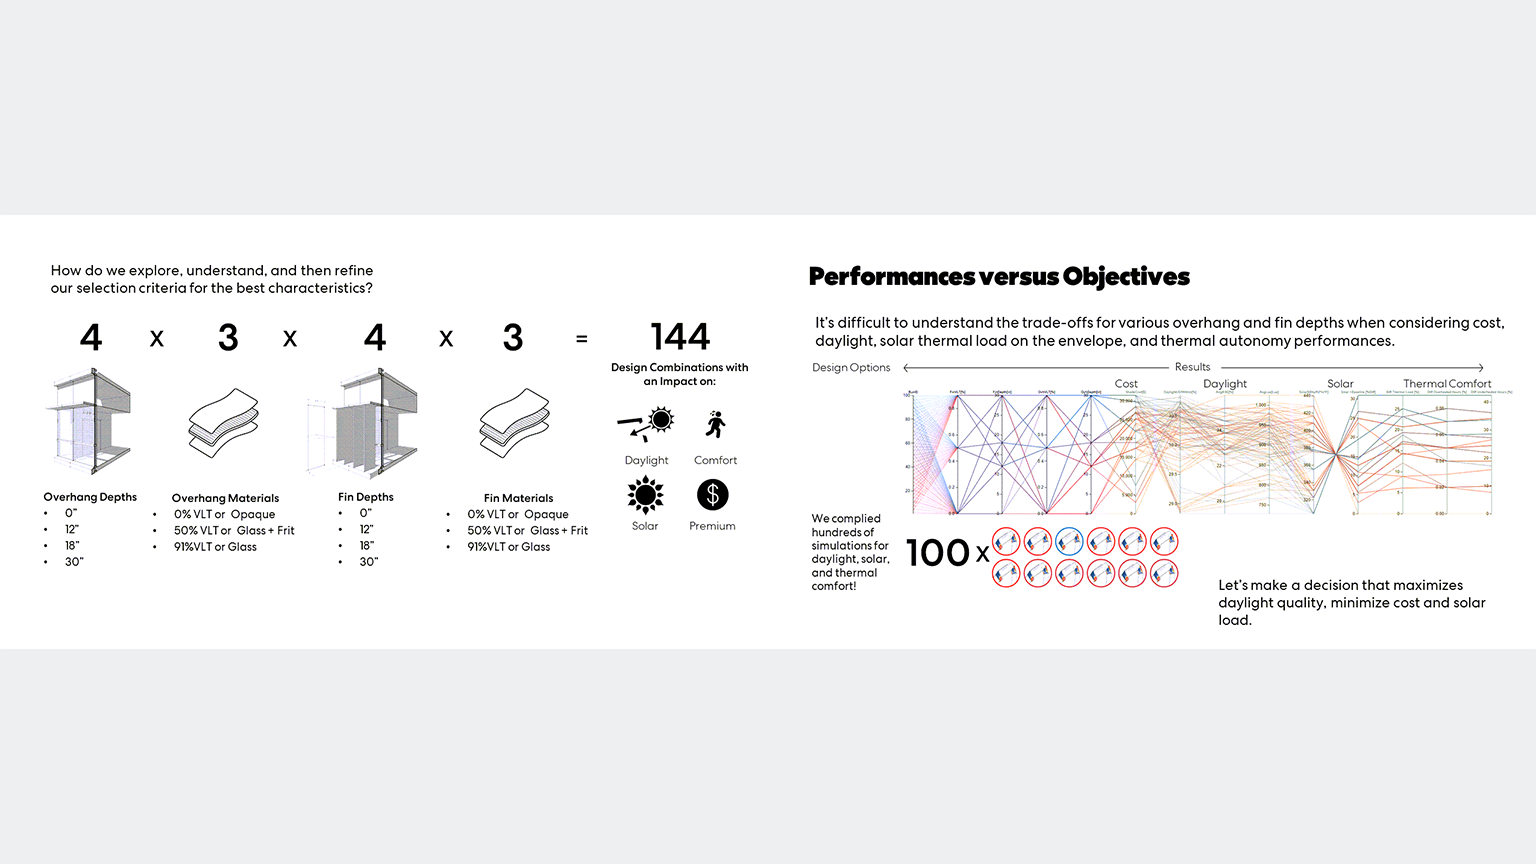 Performance versus Objectives diagrams.